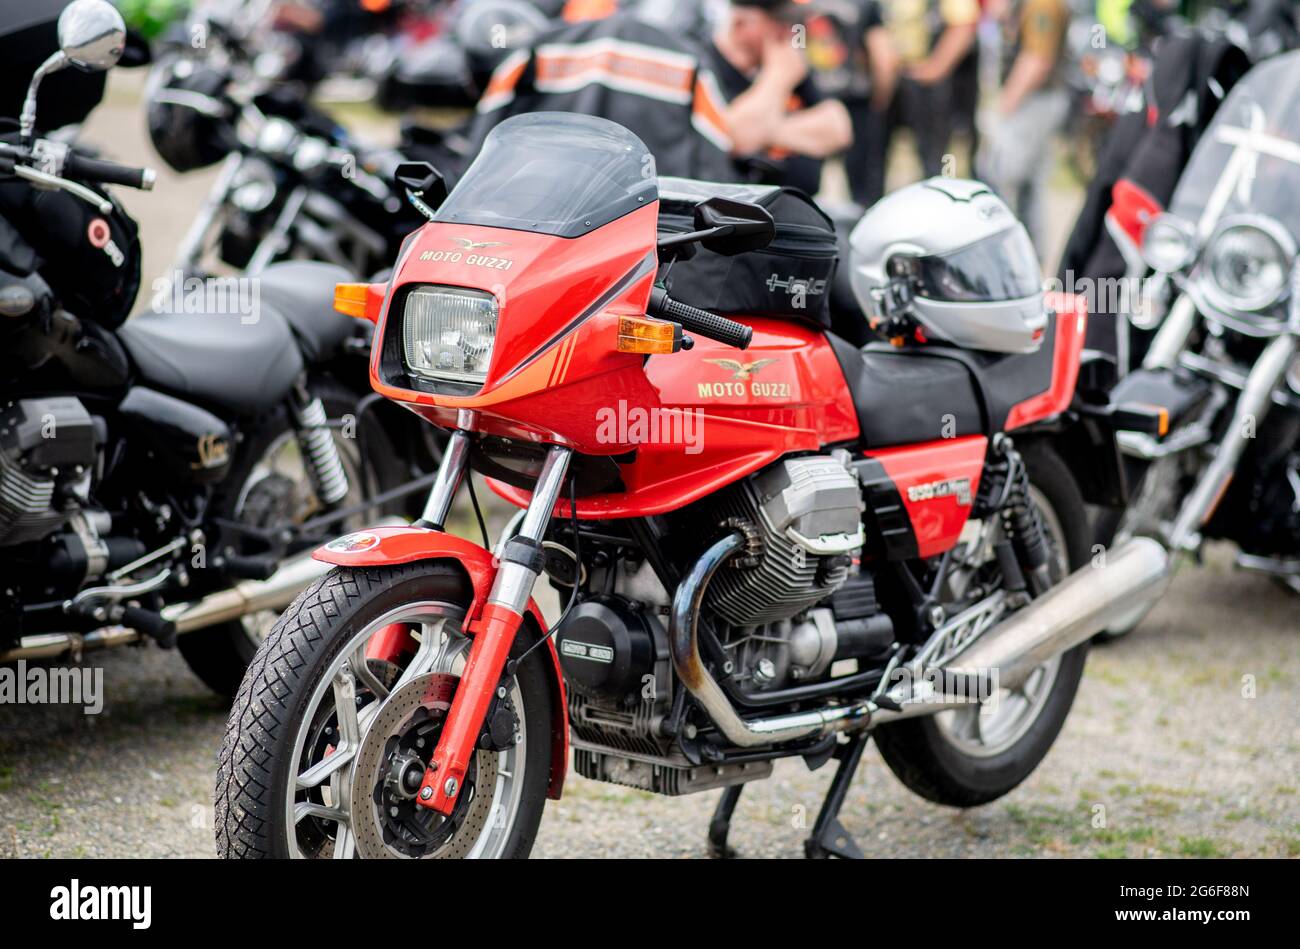 Oldenburg, Germany. 04th July, 2021. A motorcycle of the Italian  manufacturer Moto Guzzi stands during a